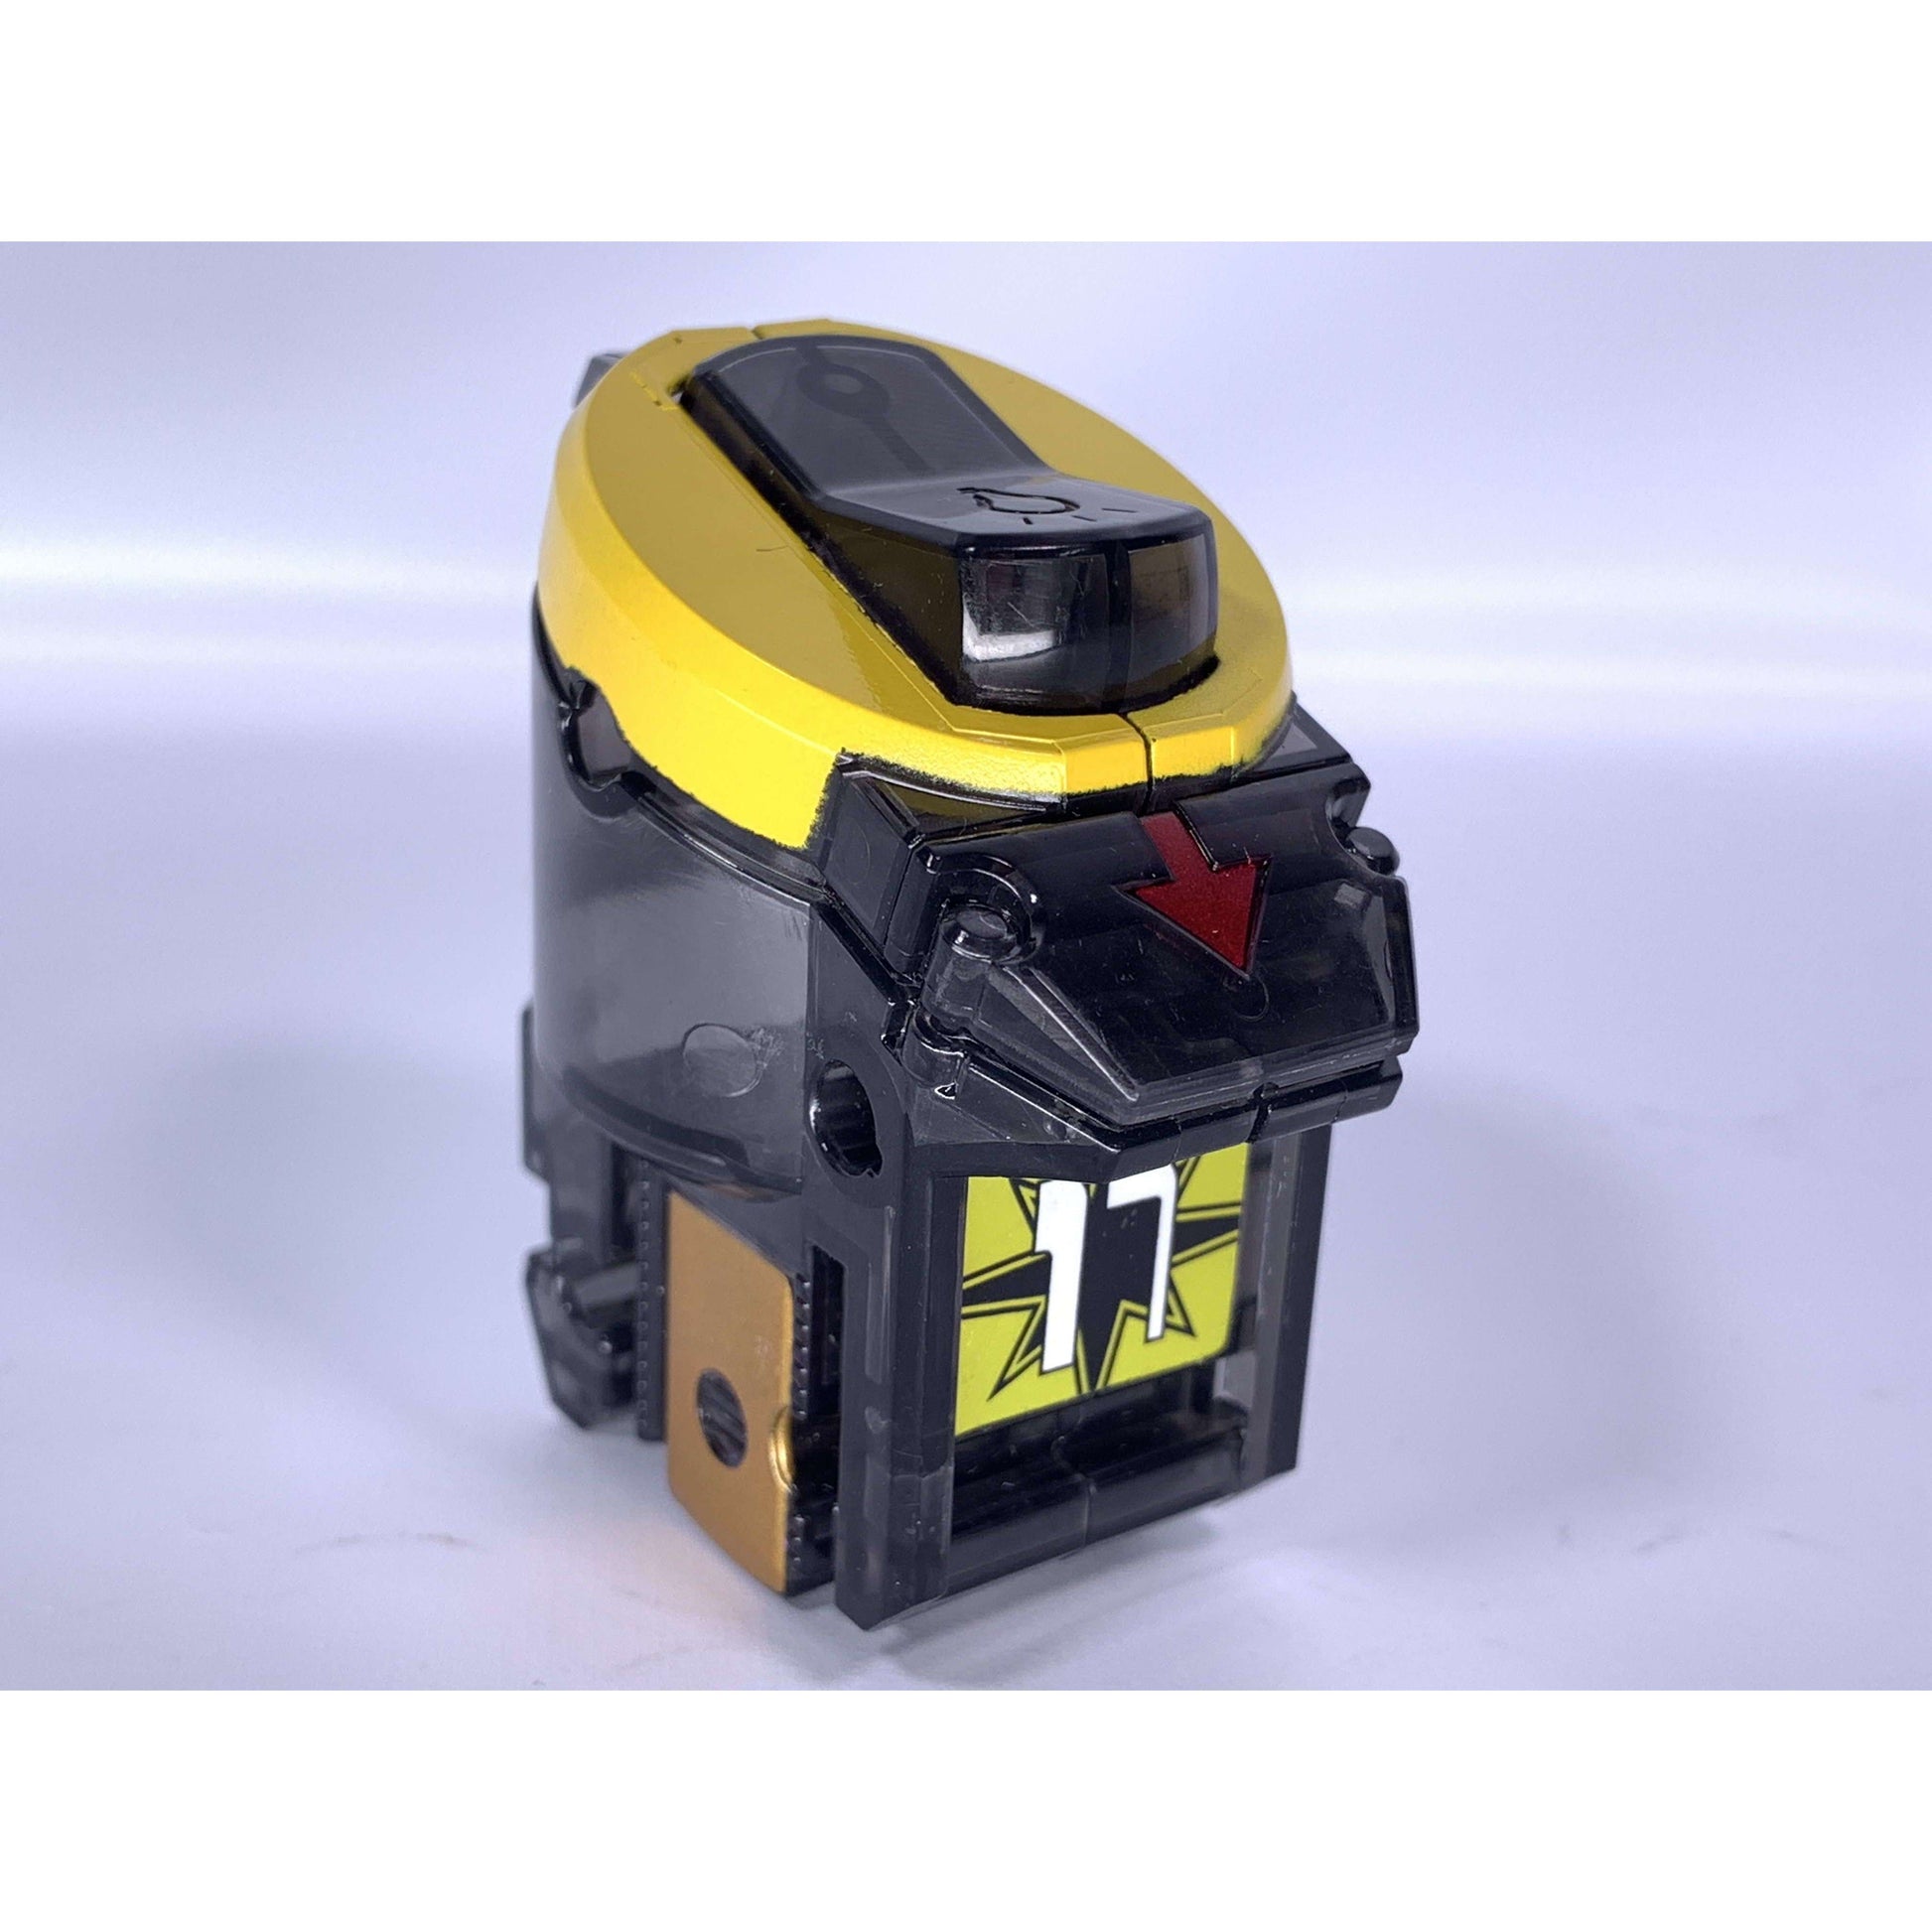 [LOOSE] KR Fourze: Capsule Toy Astro Switch #17 Flash Switch | CSTOYS INTERNATIONAL